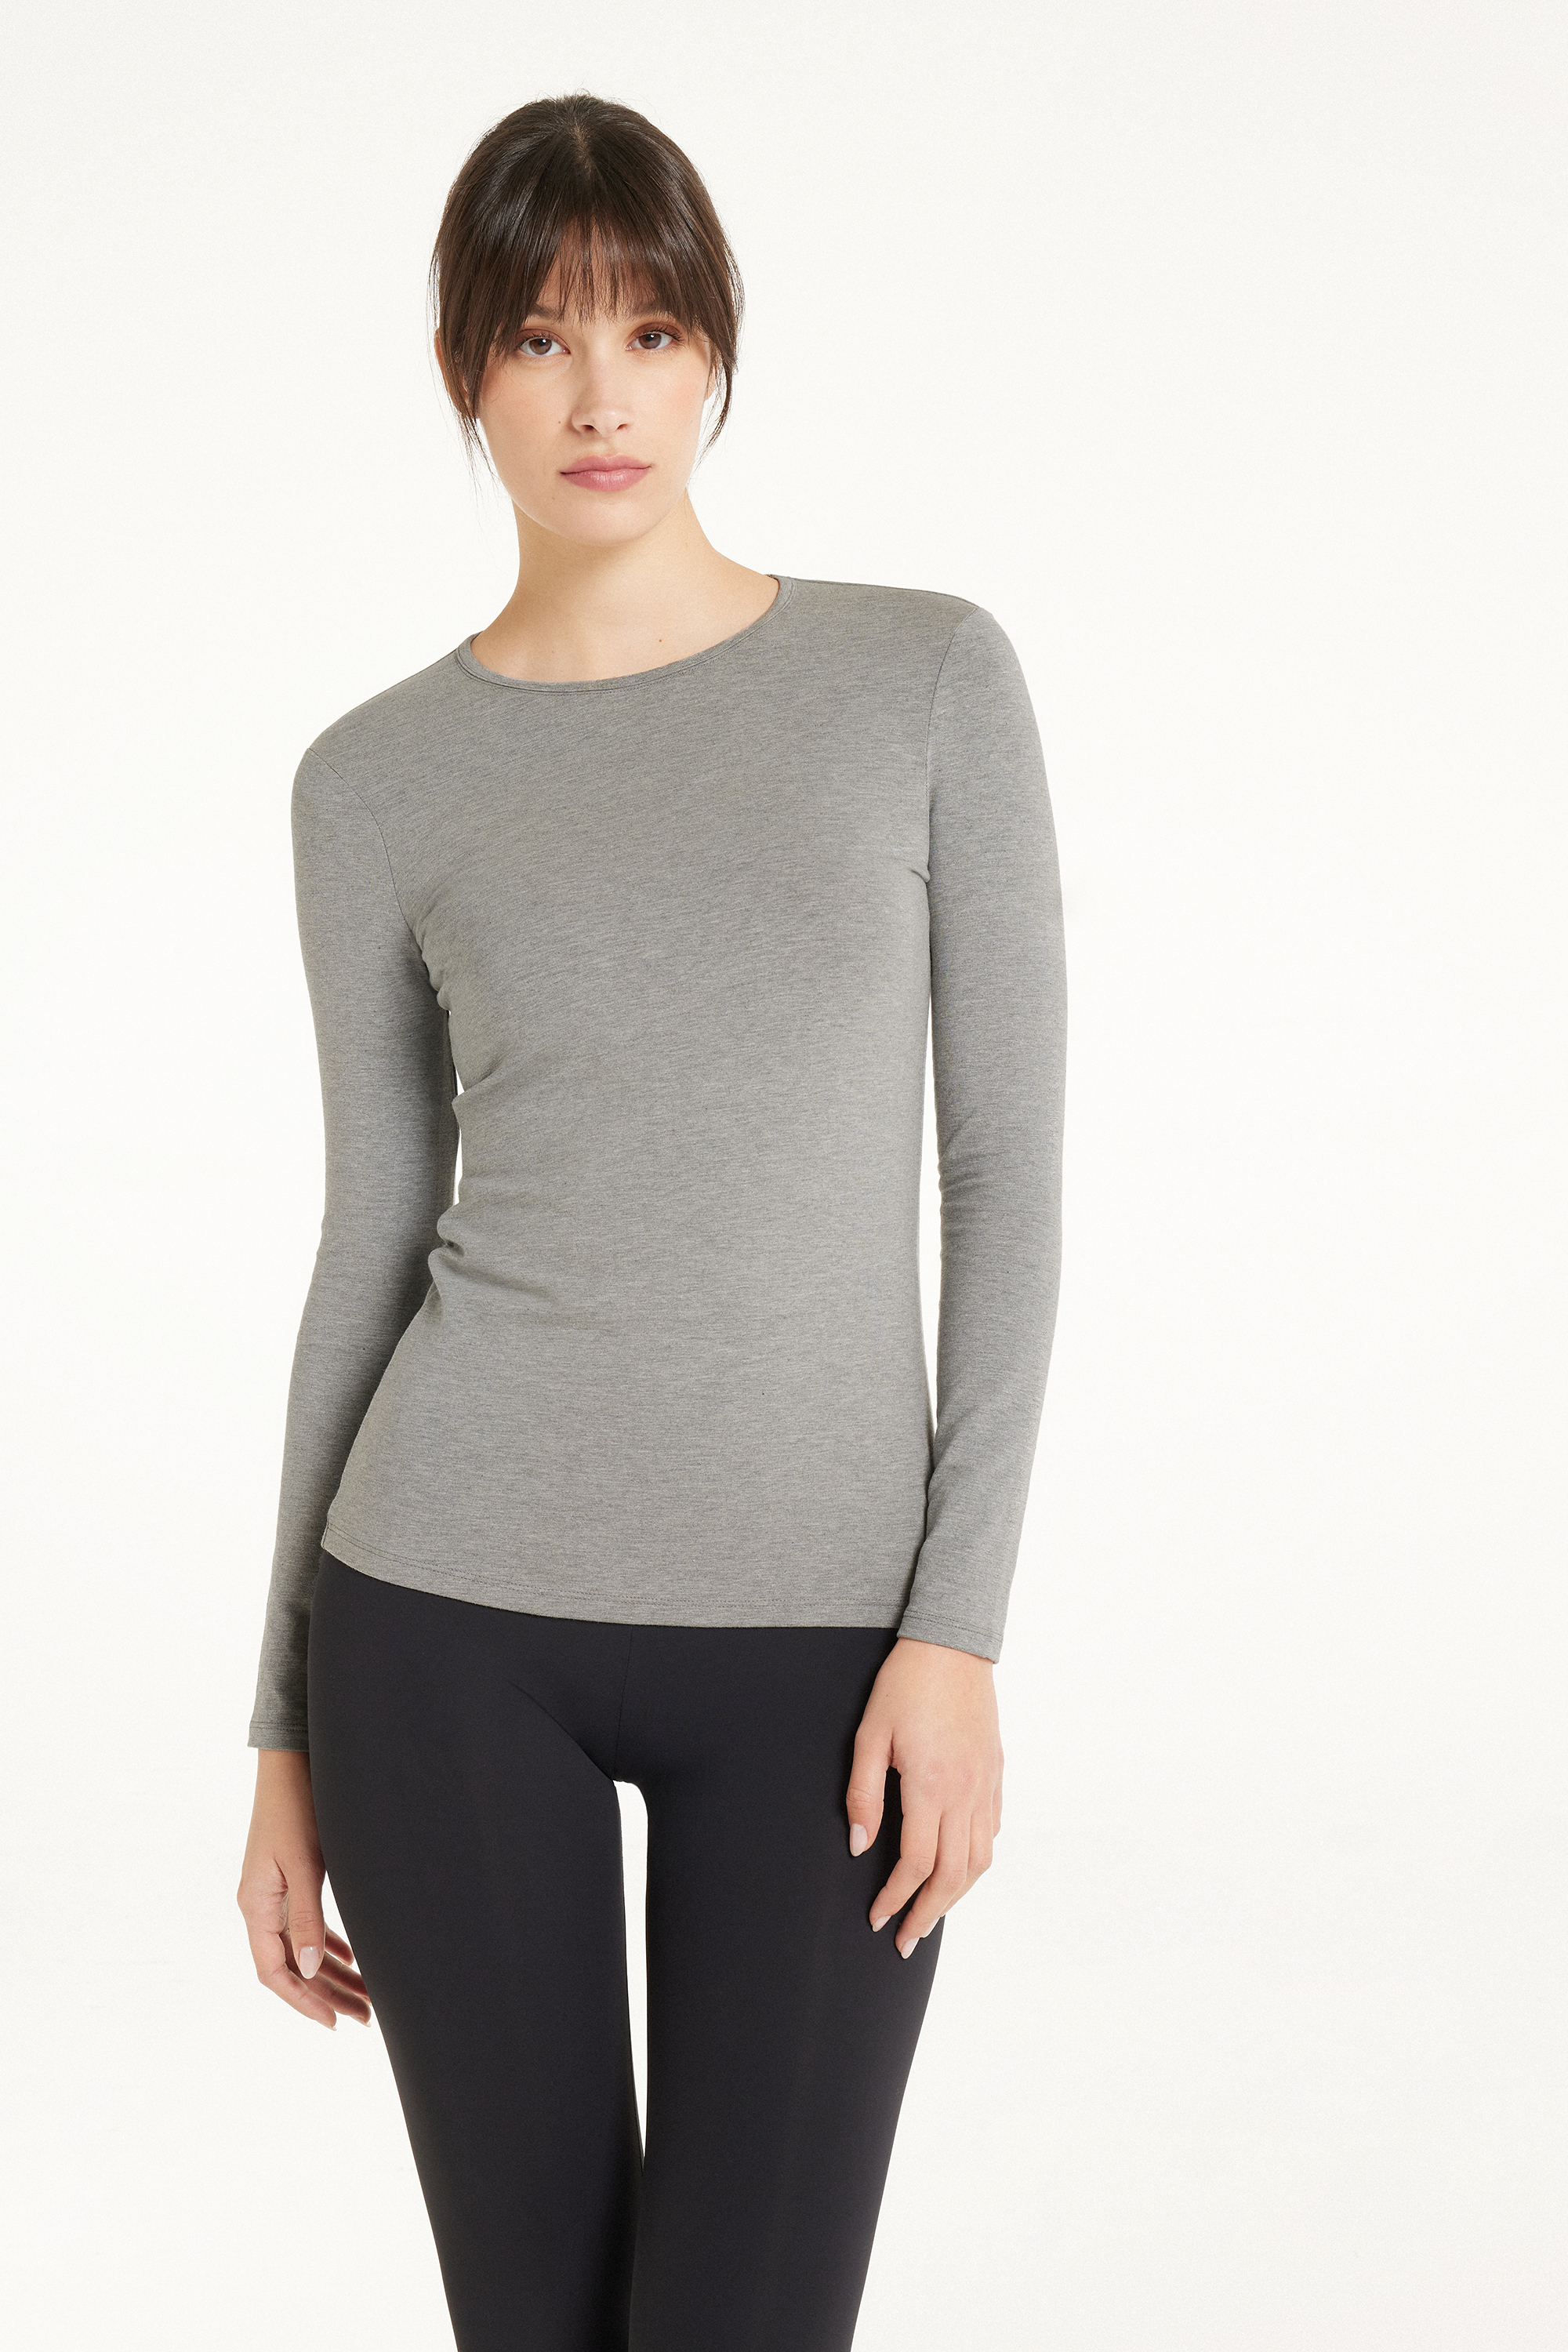 Cotton and Thermal Modal Rounded Neck Top